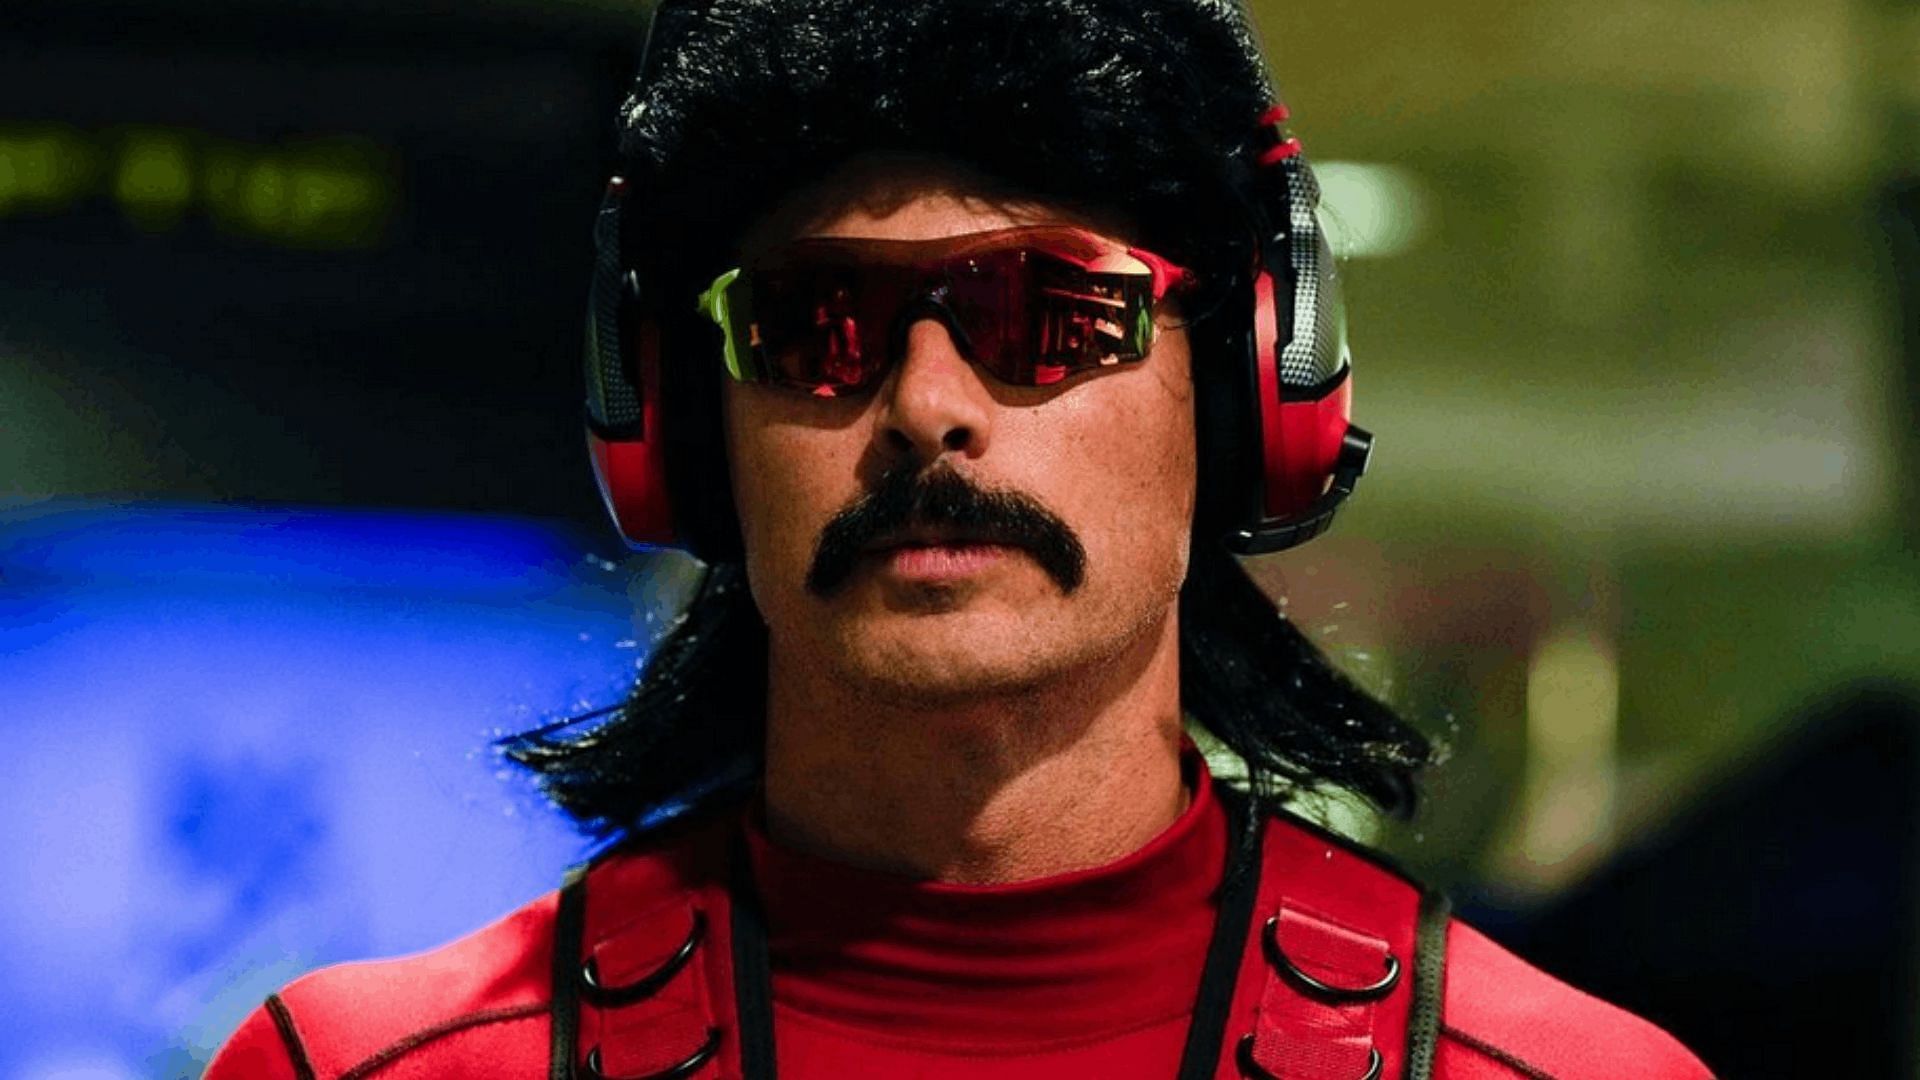 The Doc has been embroiled in many feuds over the years. (Image via drdisrespect/Instagram)